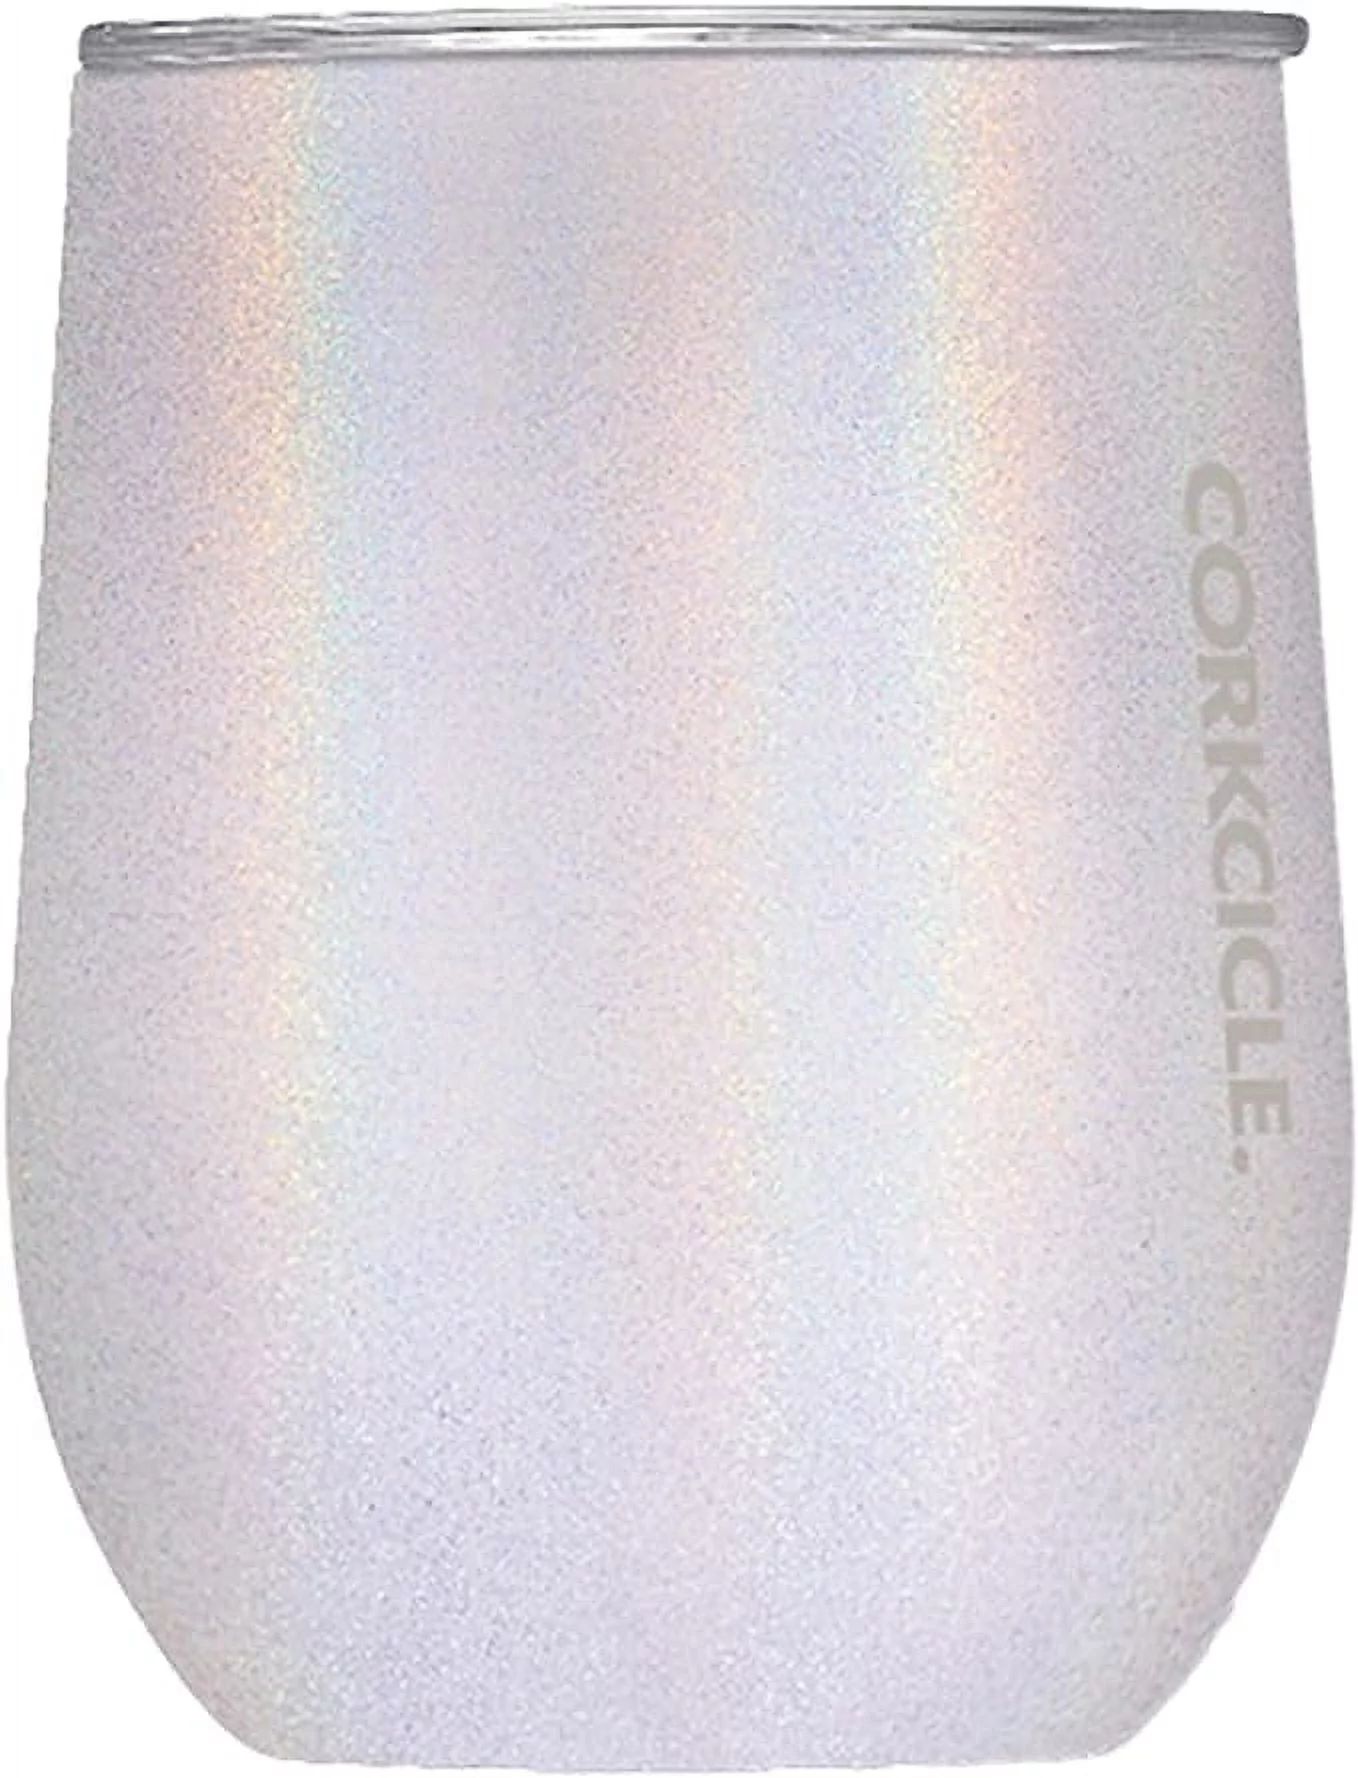 Corkcicle 12 oz Stemless Reusable Wine Beverage Glass, Stainless Steel, Triple Insulated, Unicorn... | Walmart (US)